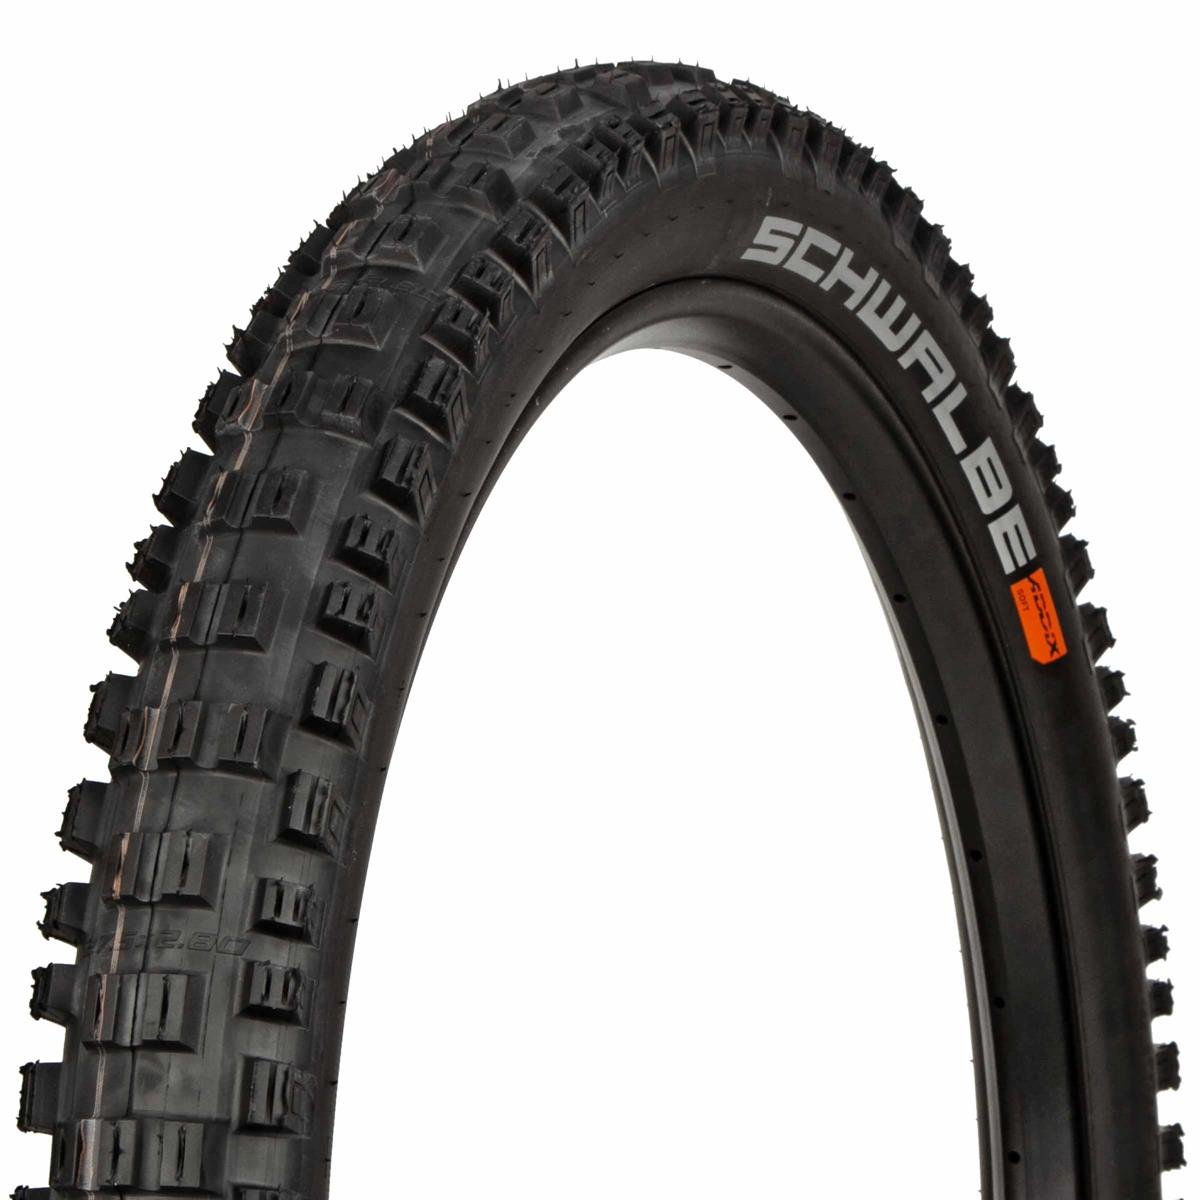 Schwalbe MTB Tire Eddy Current Front HS 496 Black, 27.5 x 2.8 Inches, Evo, Super Trail, SnakeSkin, Tubeless Easy, Addix Soft, Foldable